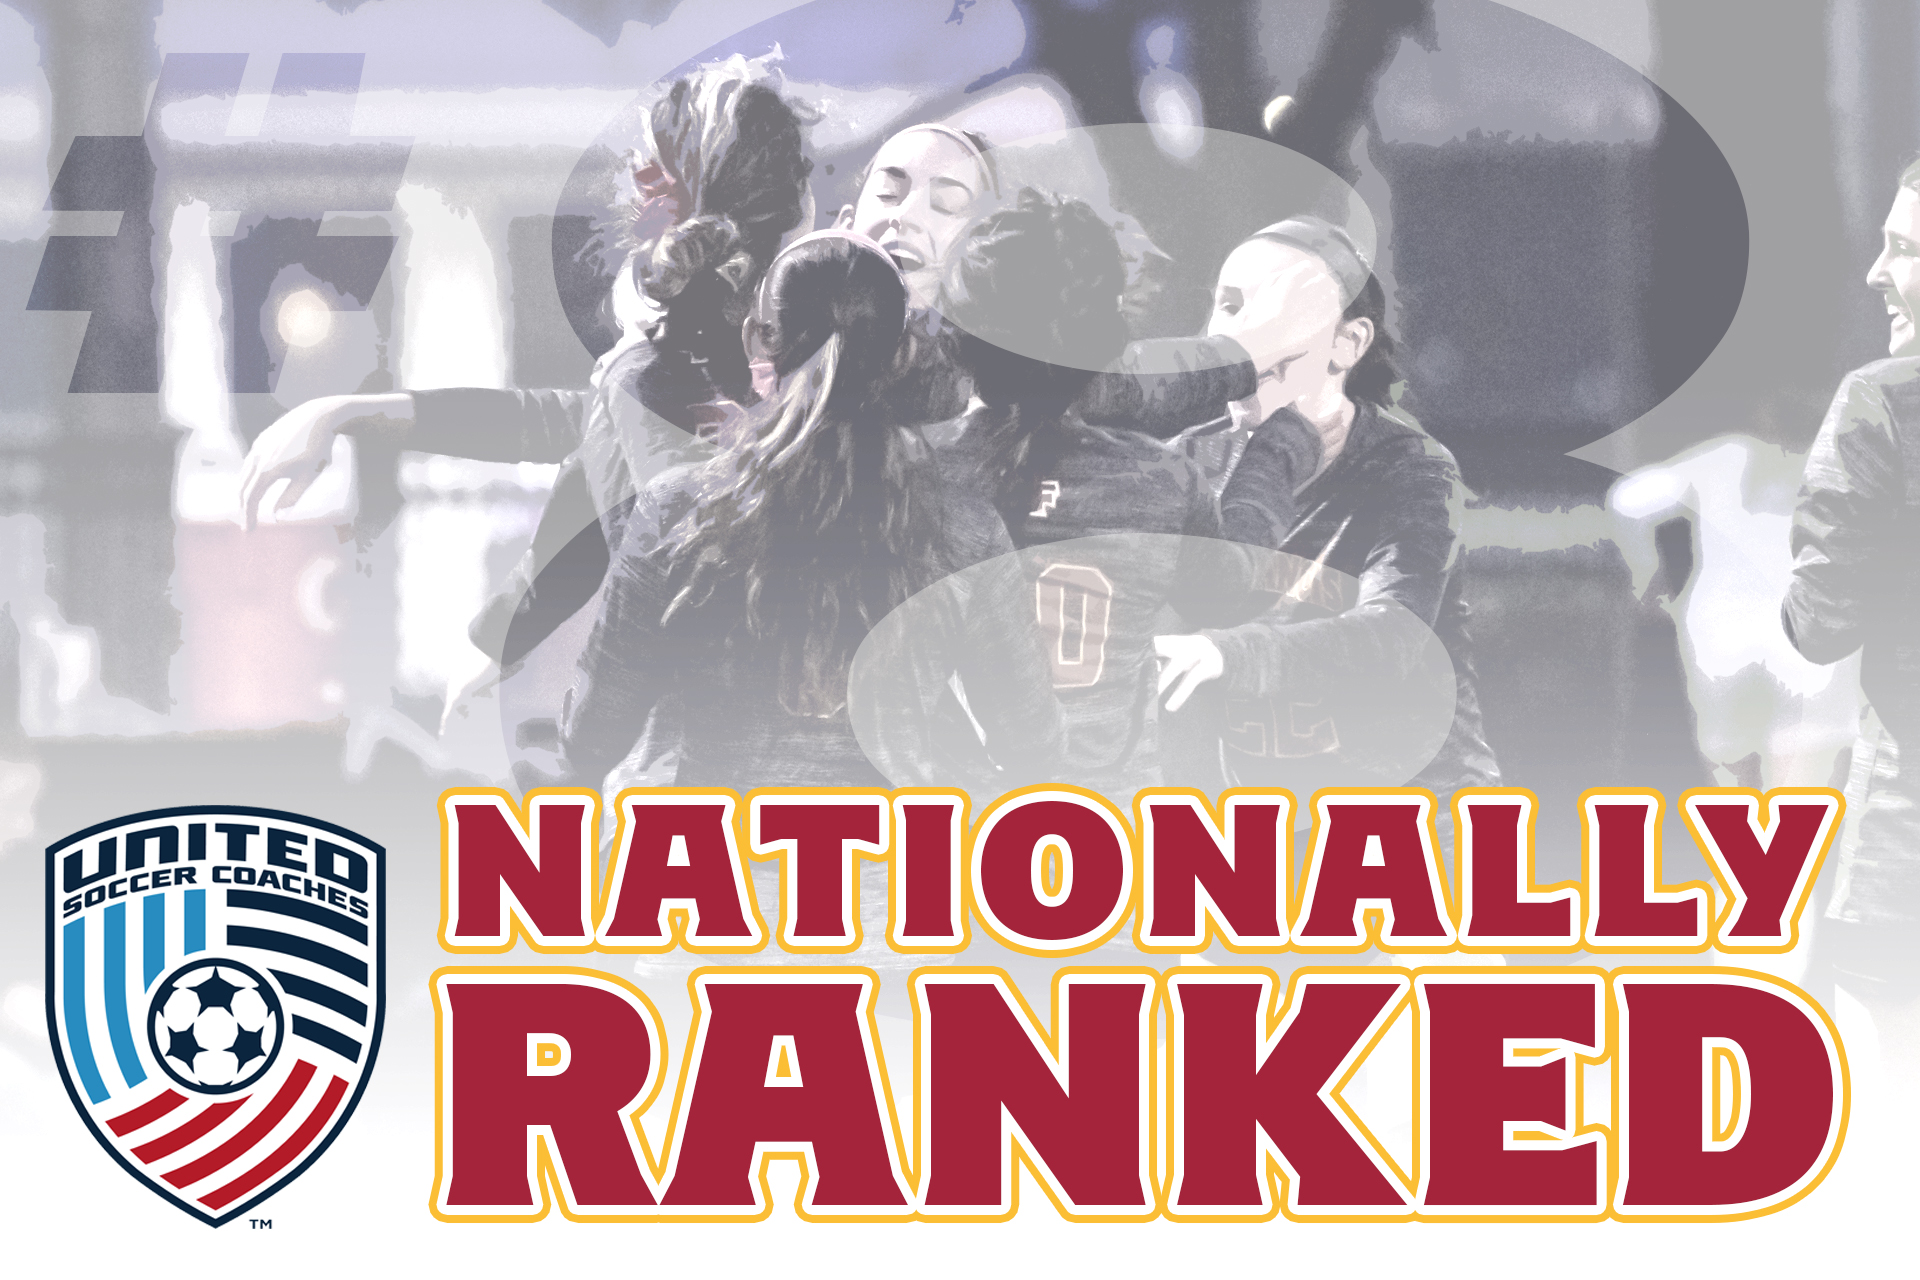 Troubie soccer snares national ranking